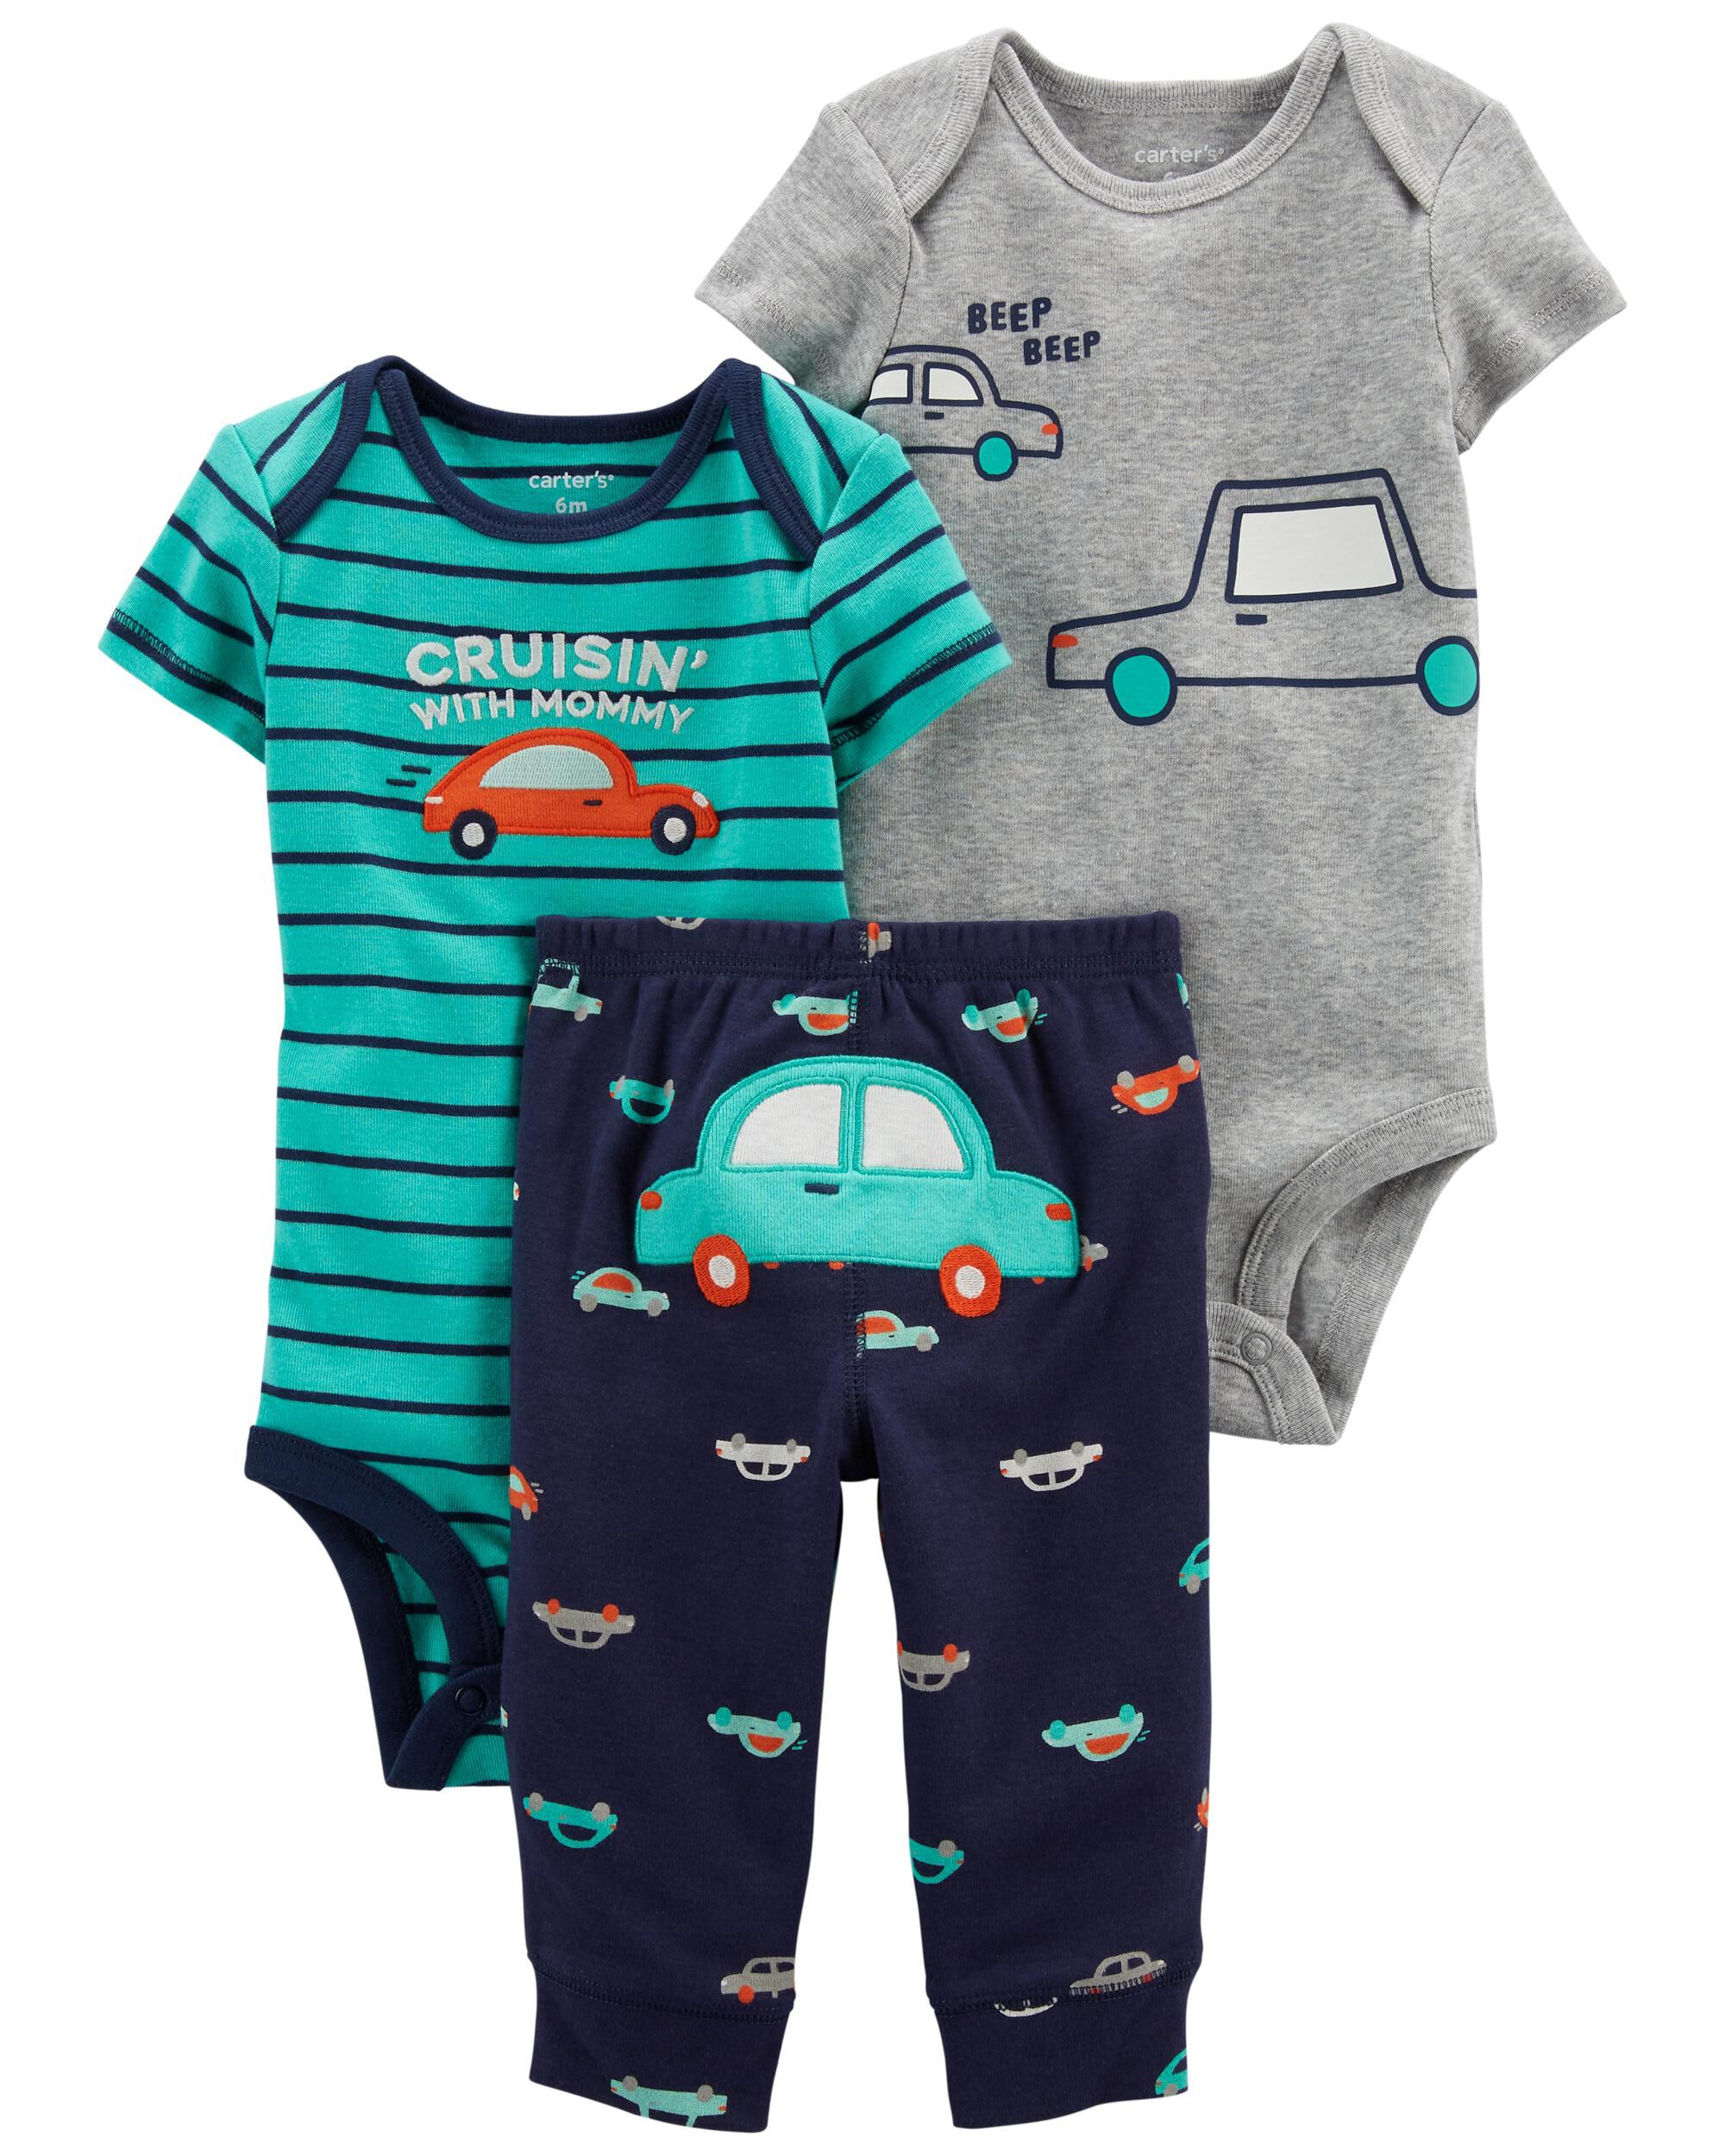 Carters Baby Girl's 3-Piece Little CharacterDaddy's Little Pr Set CHECK FOR SIZE 